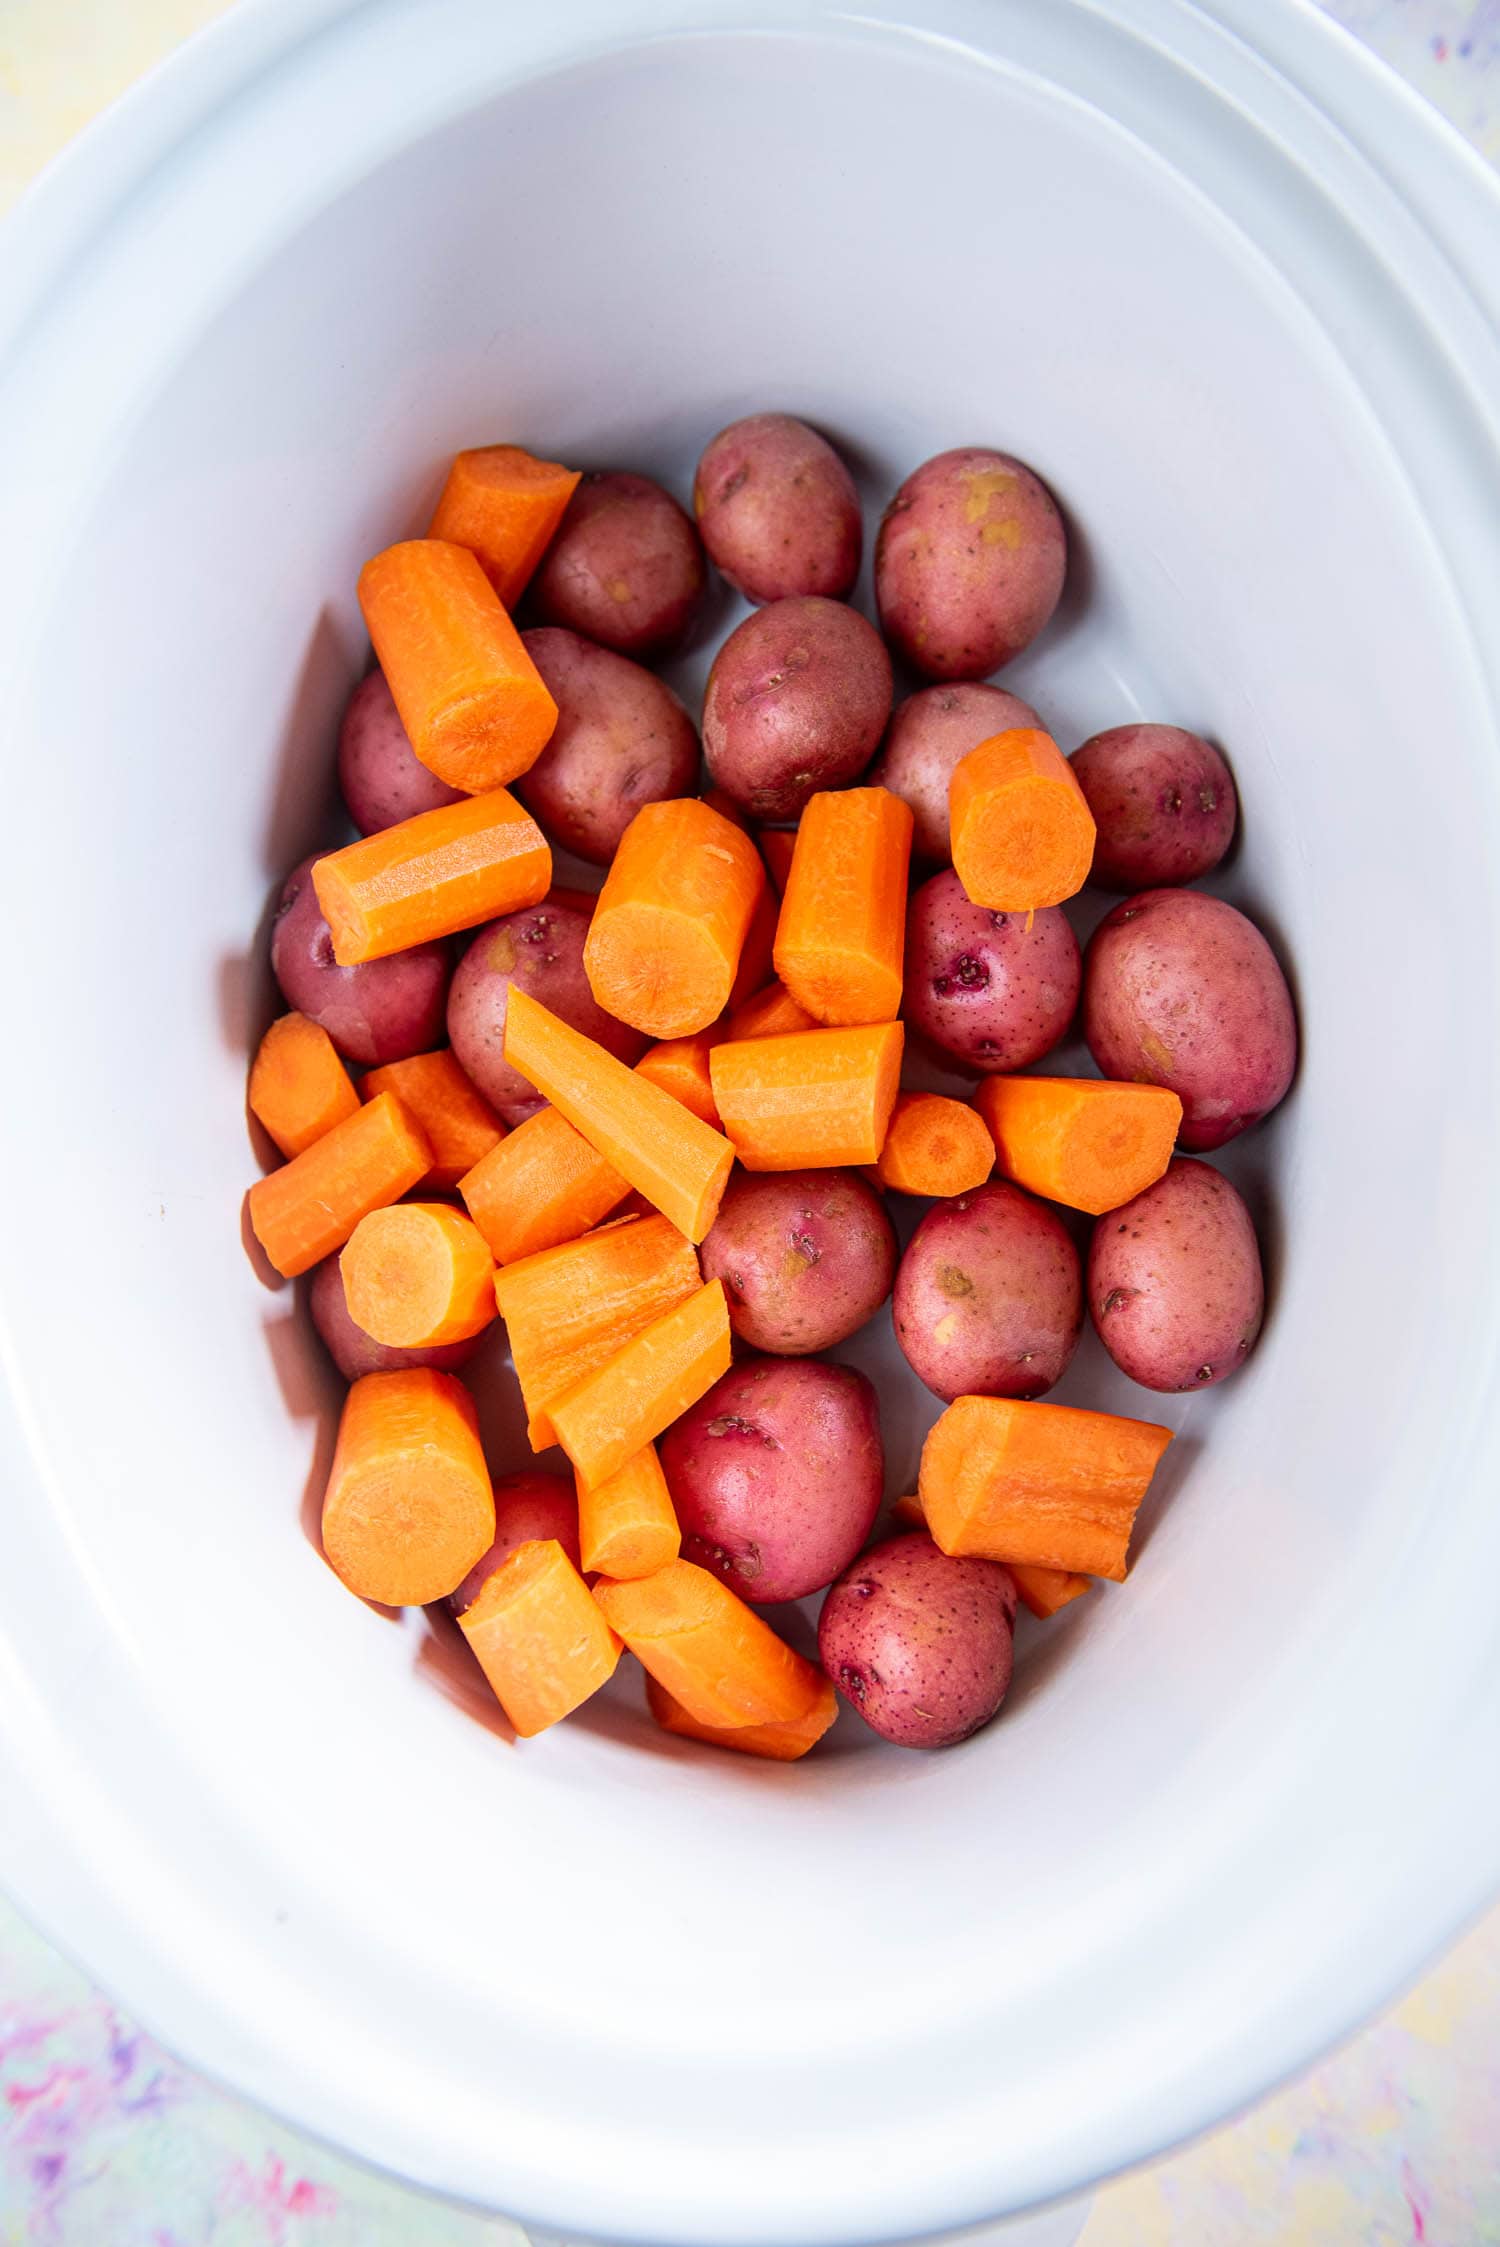 carrots and potatoes in slow cooker